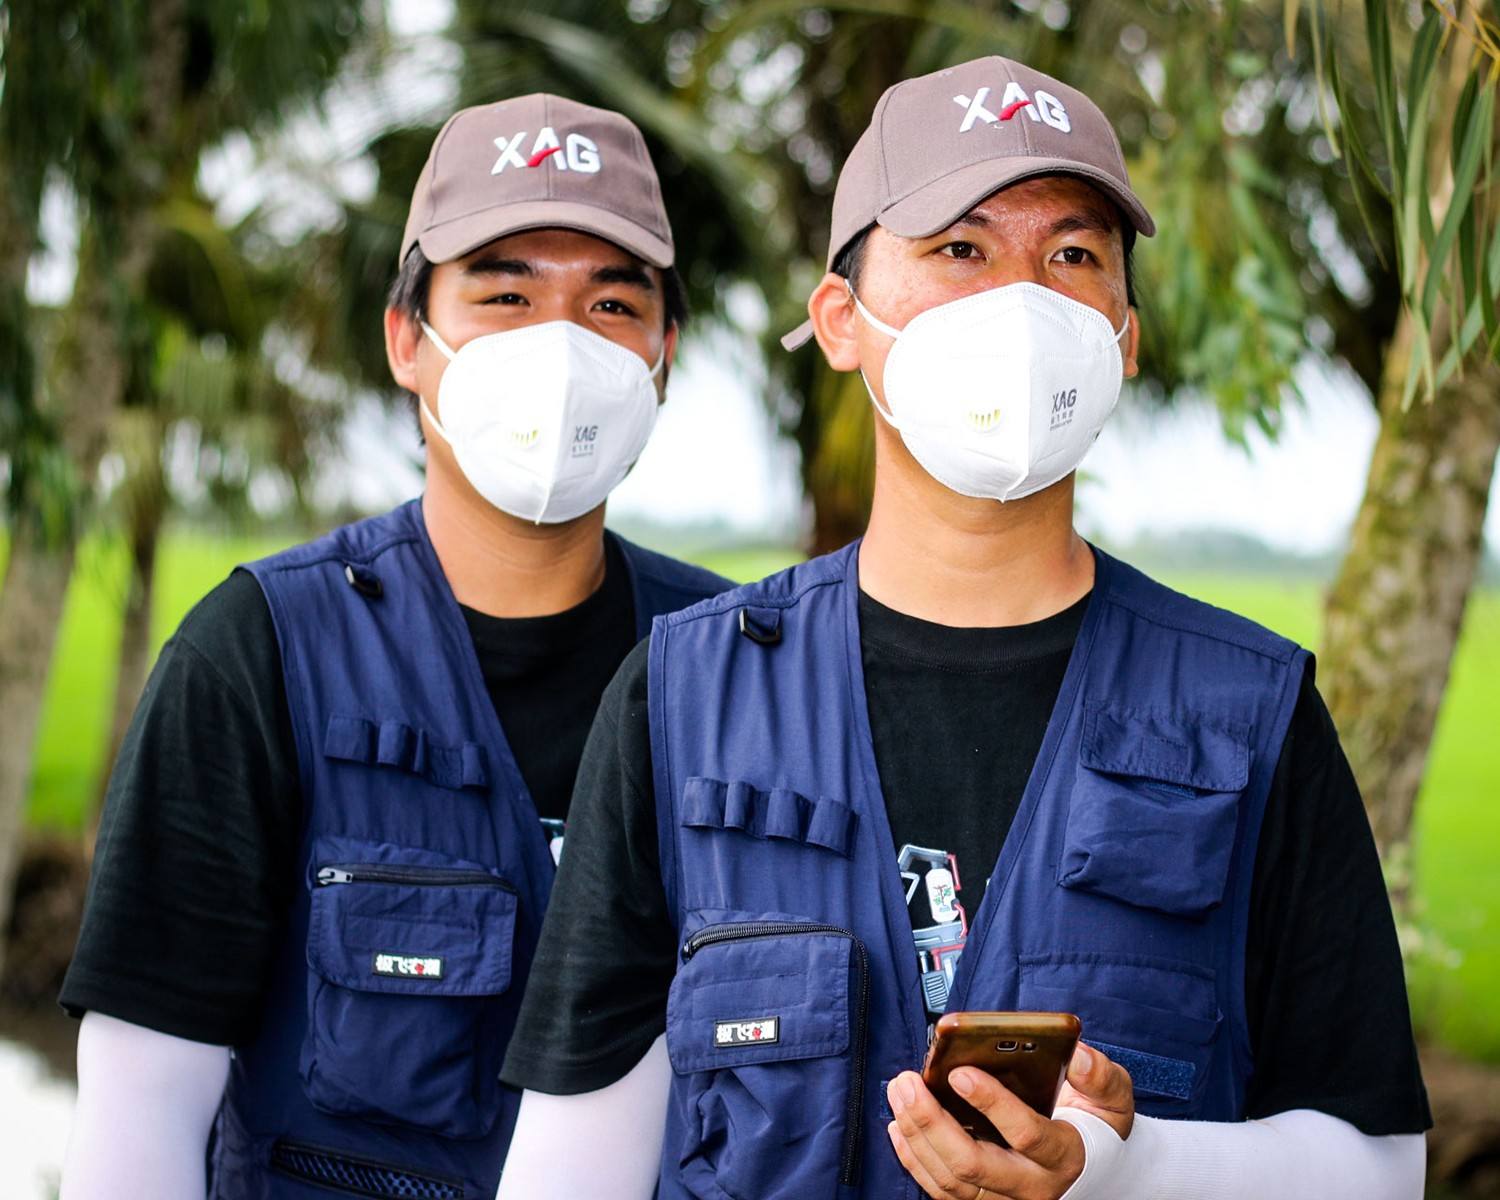 Suit up with steady gaze at the nearby drones. As everything is ready, these two newbies of farming are now on the way to becoming skilled drone operators. 